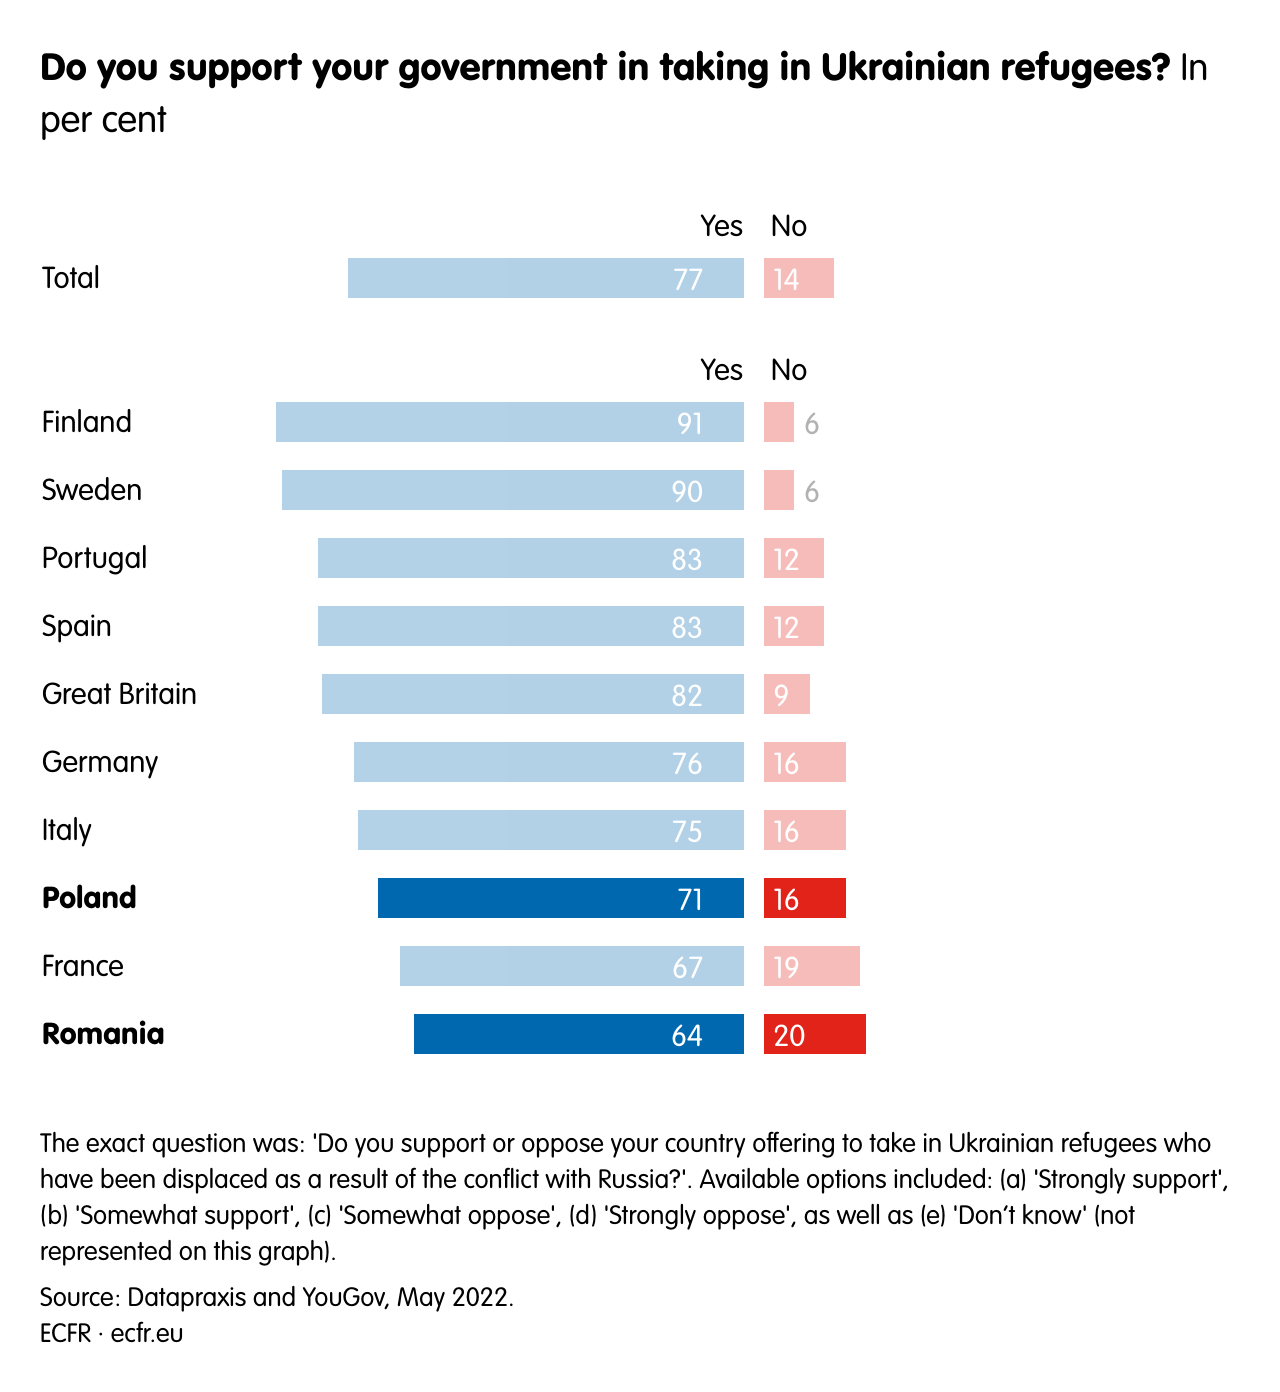 Do you support your government in taking in Ukrainian refugees?